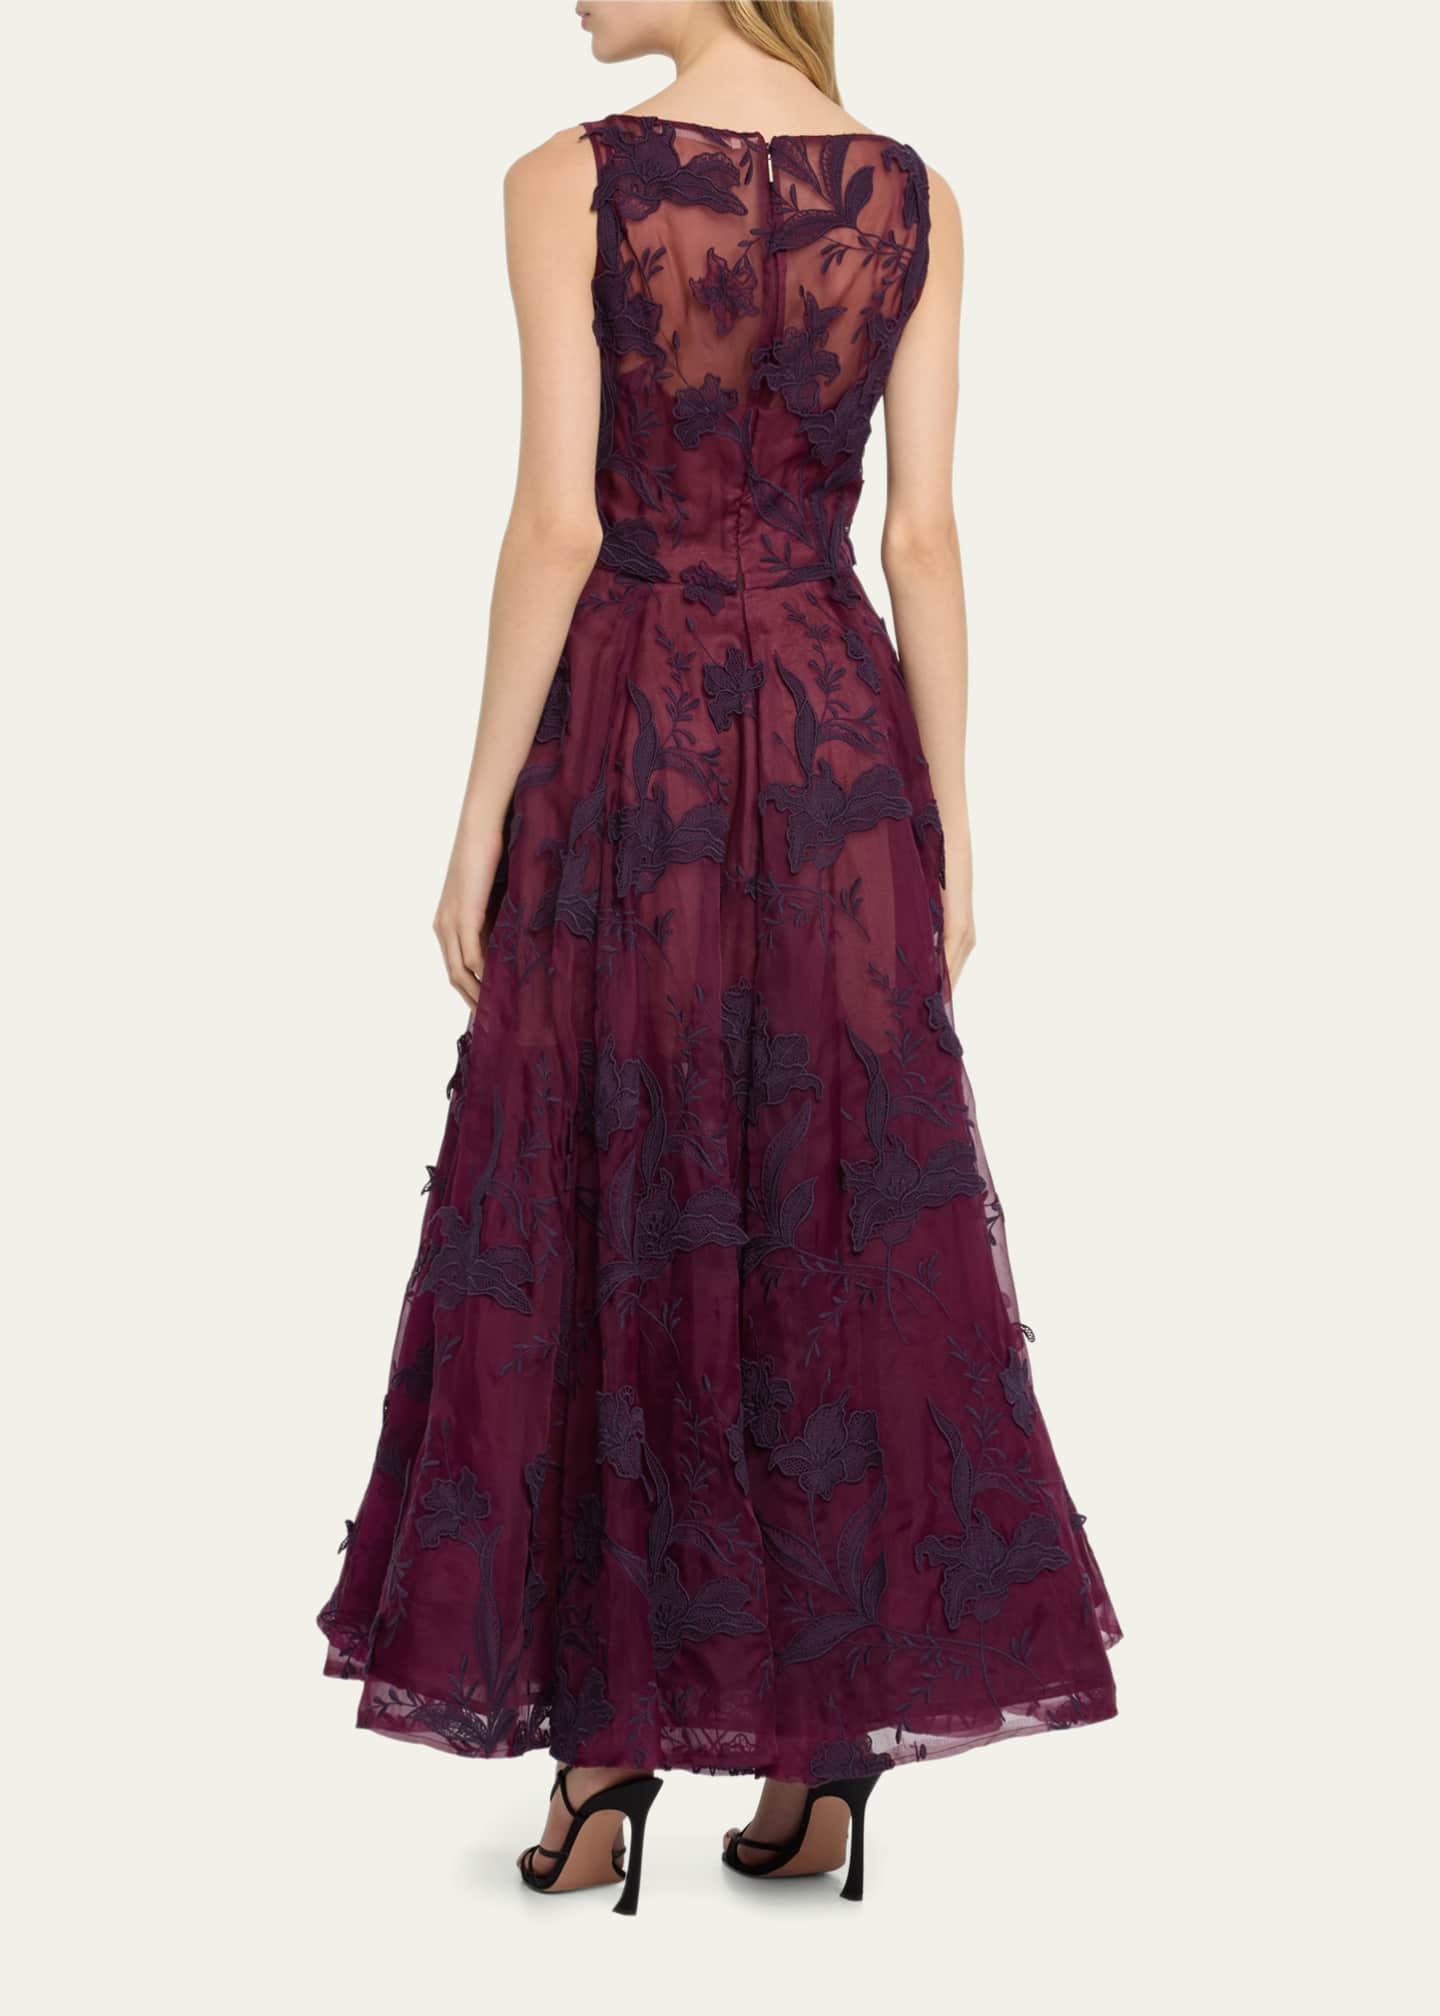 Jason Wu Collection Embroidered Organza Sleeveless Cocktail Dress